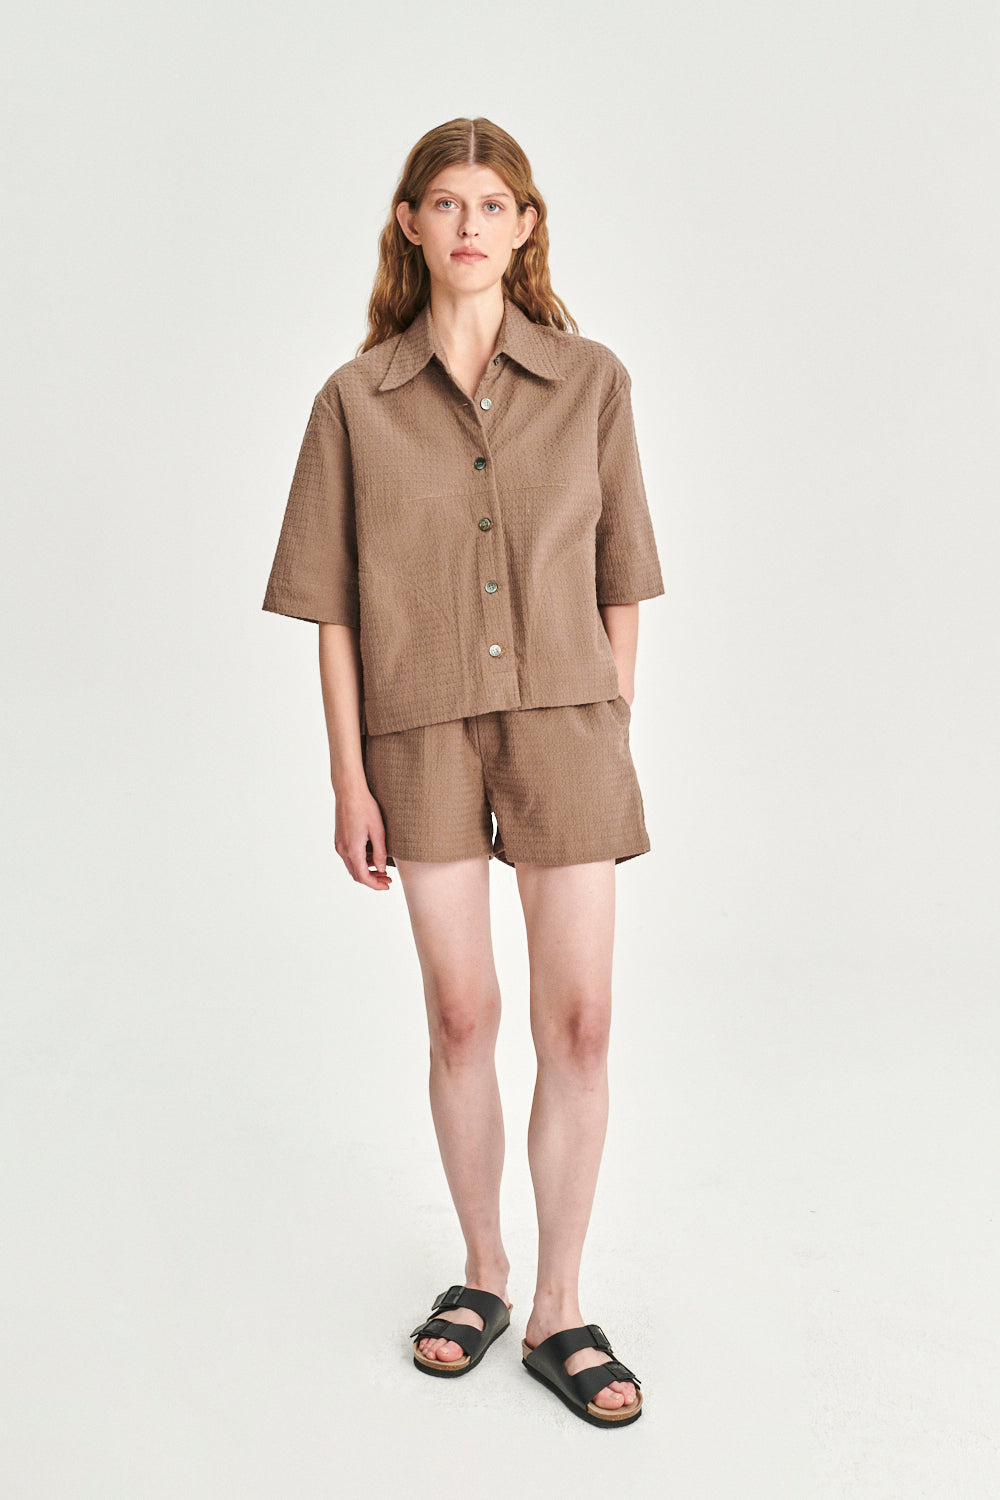 Relaxed Shirt Jacket with Side Pockets and Decorative Darts in a Brown Portuguese Cotton